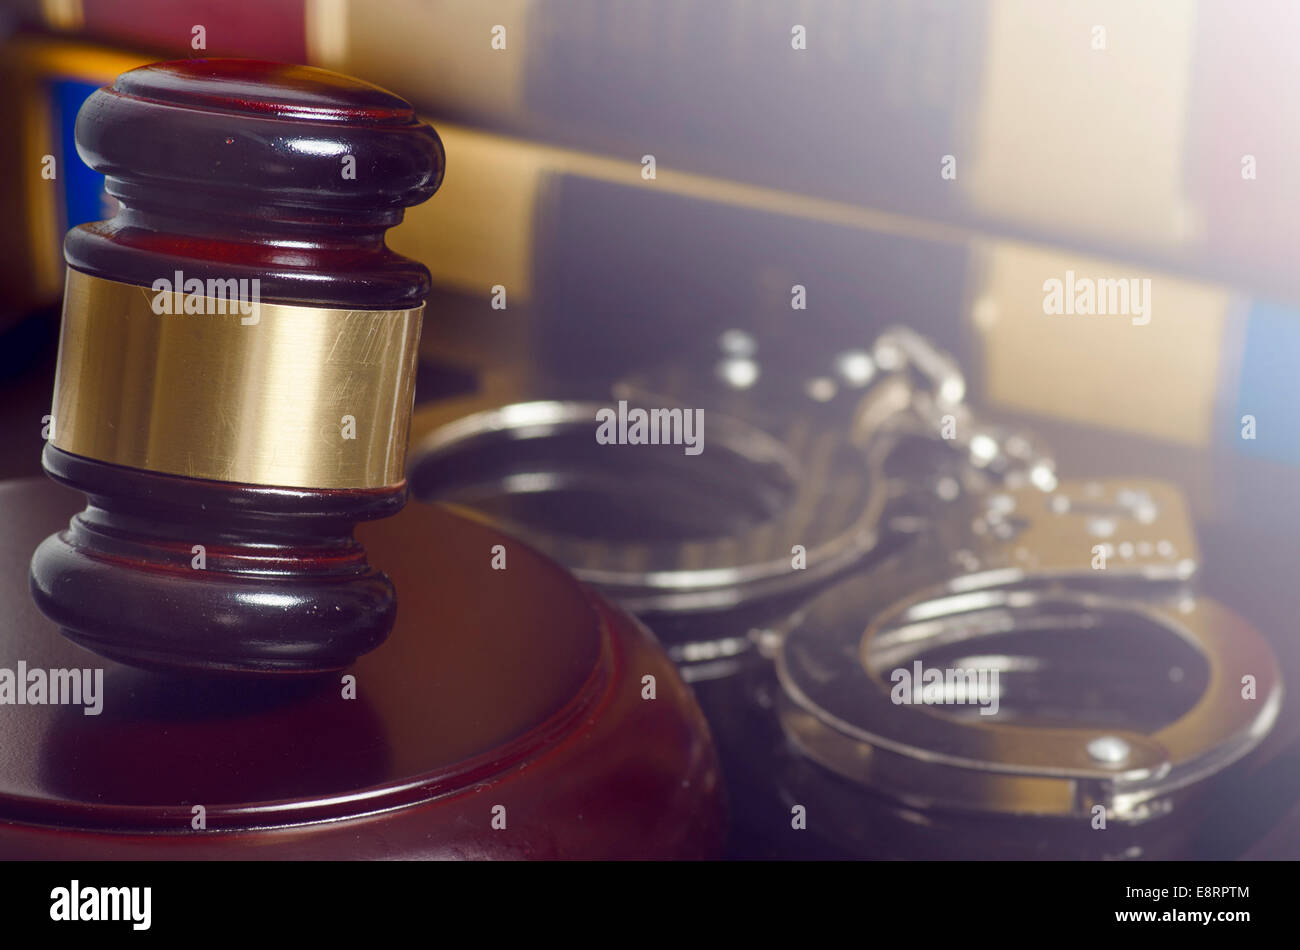 Legal law concept image.  Handcuffs gavel and law books Stock Photo